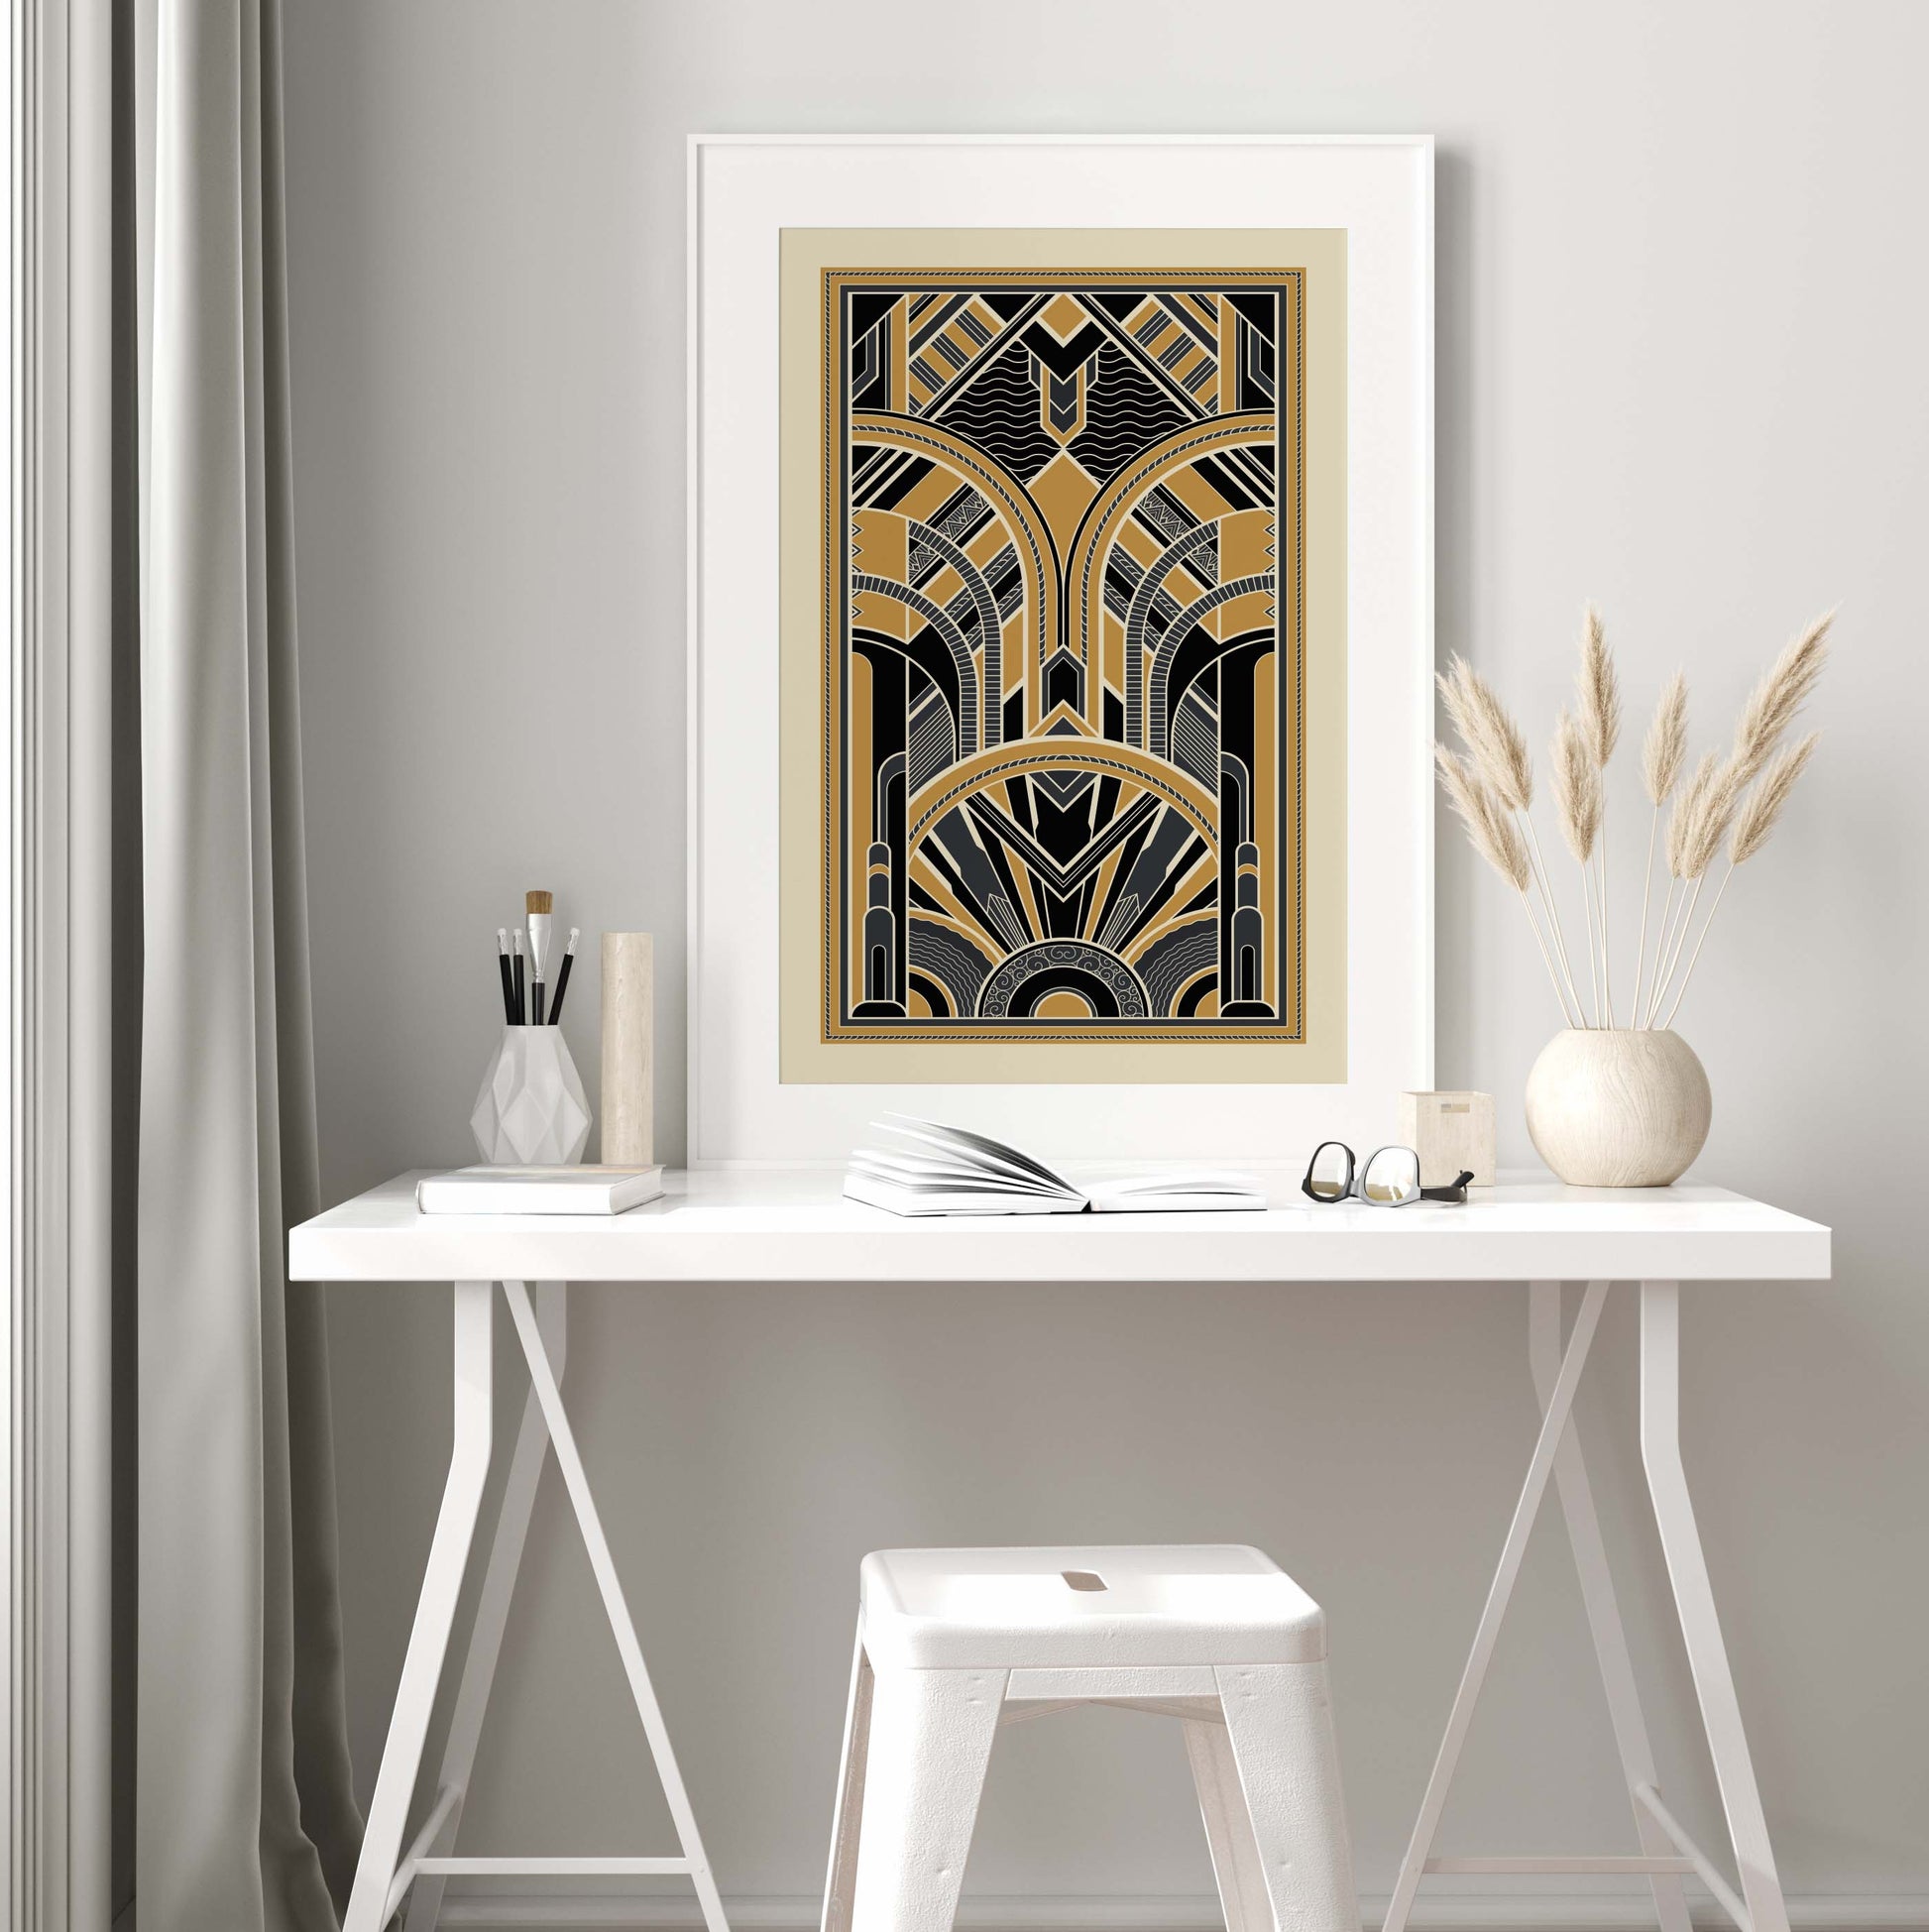 Art deco print with geometric pattern in gold and black